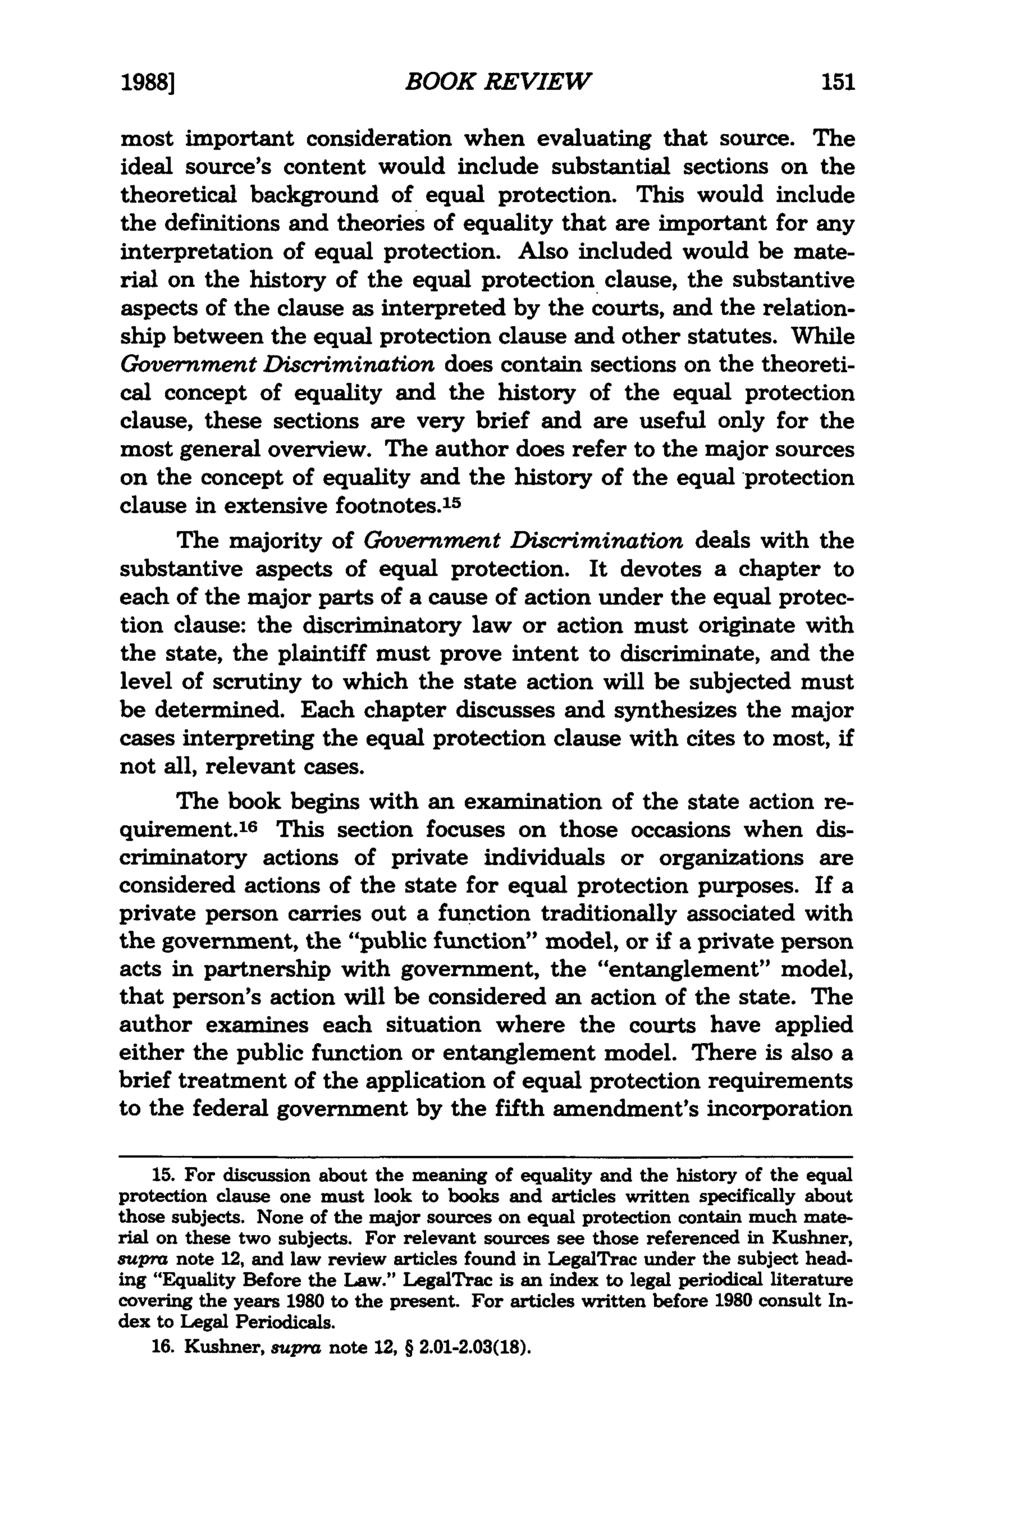 1988] BOOK REVIEW most important consideration when evaluating that source. The ideal source's content would include substantial sections on the theoretical background of equal protection.